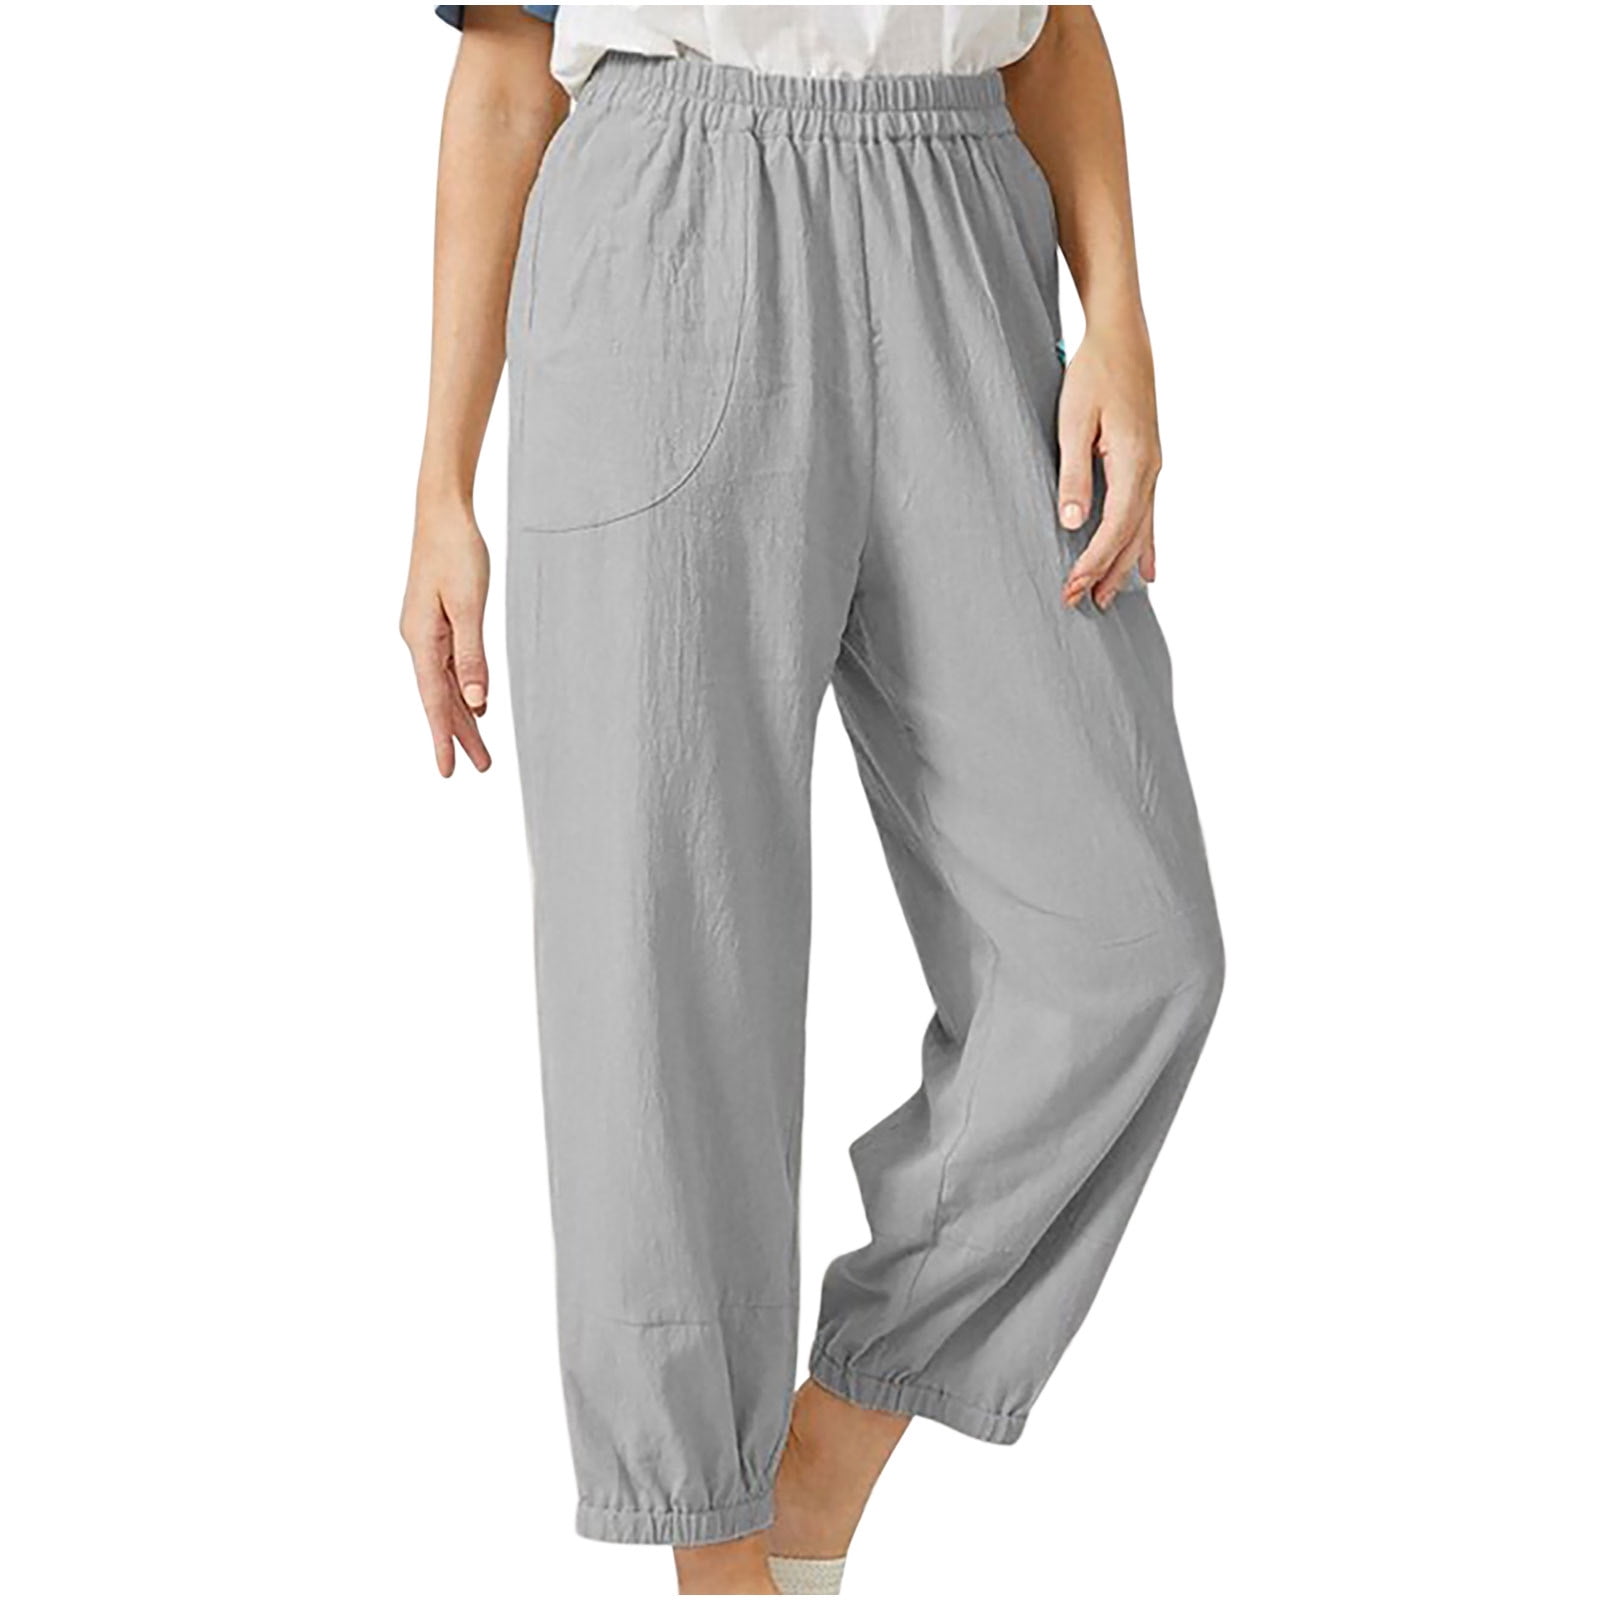 KIJBLAE Women's Bottoms Fashion Full Length Trousers Solid Color Comfy  Lounge Casual Pants Straight Leg Pants For Girls Gray XL - Walmart.com